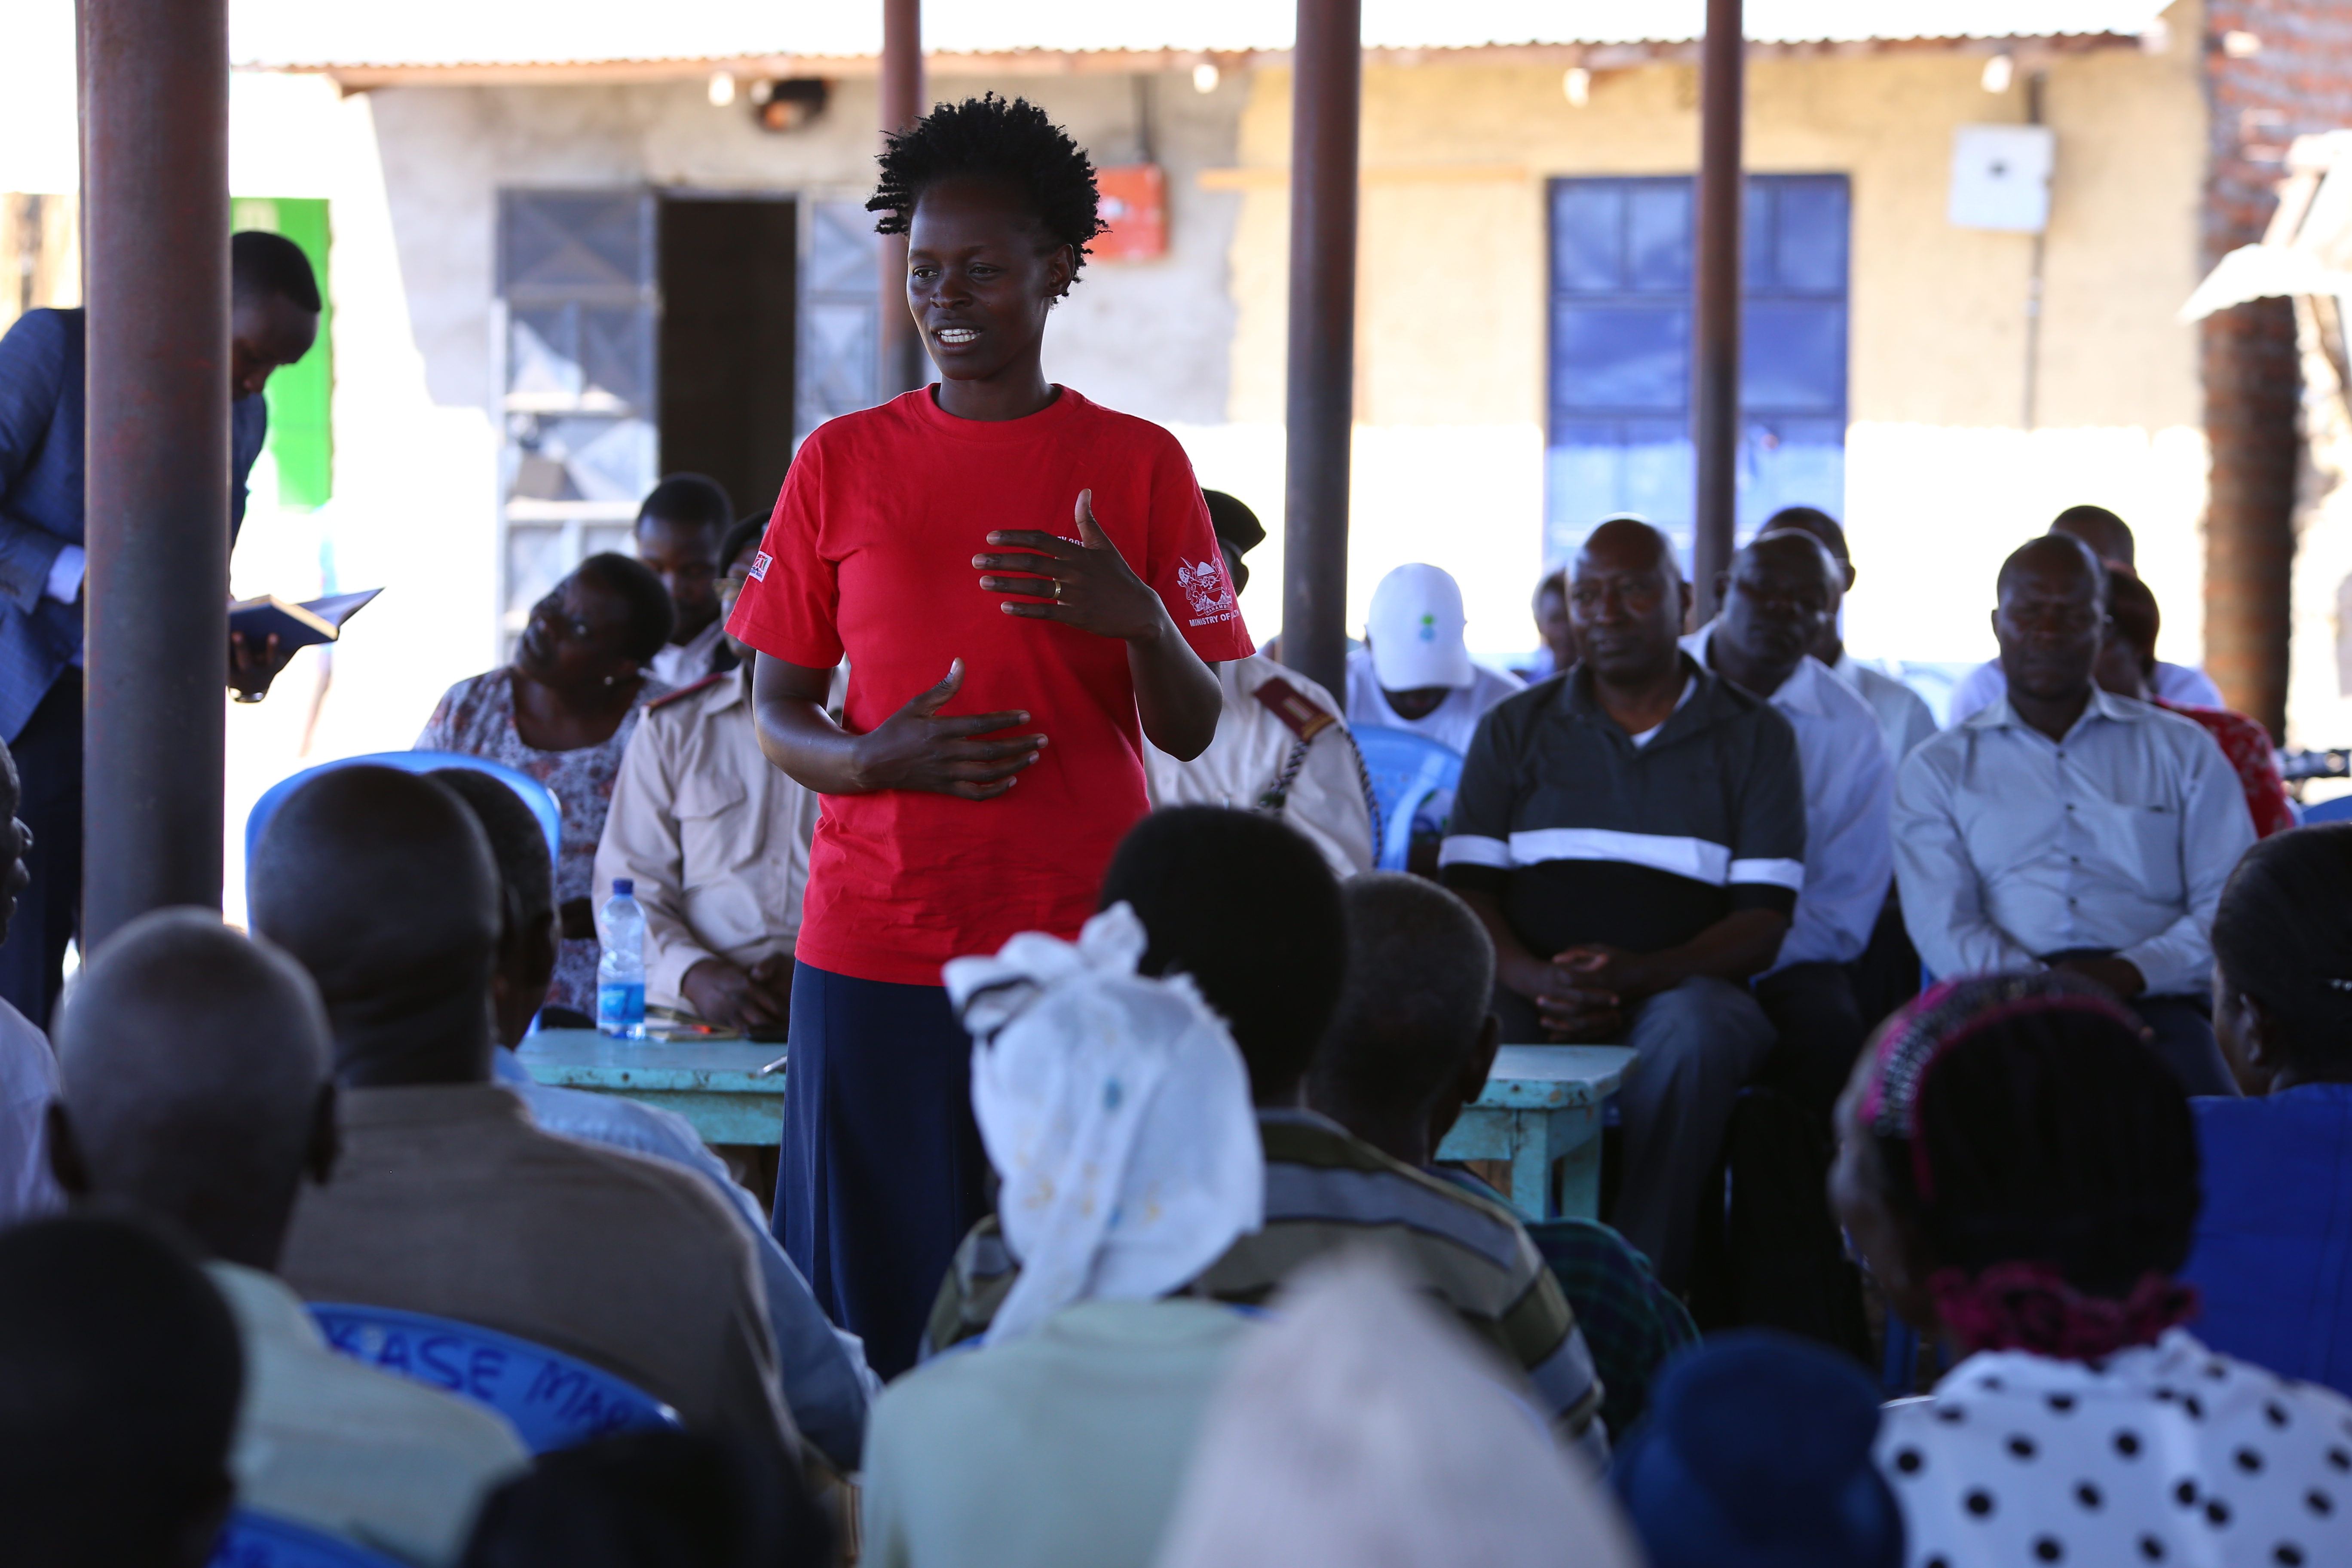 Community Health Volunteer giving a health talk during a community dialogue day